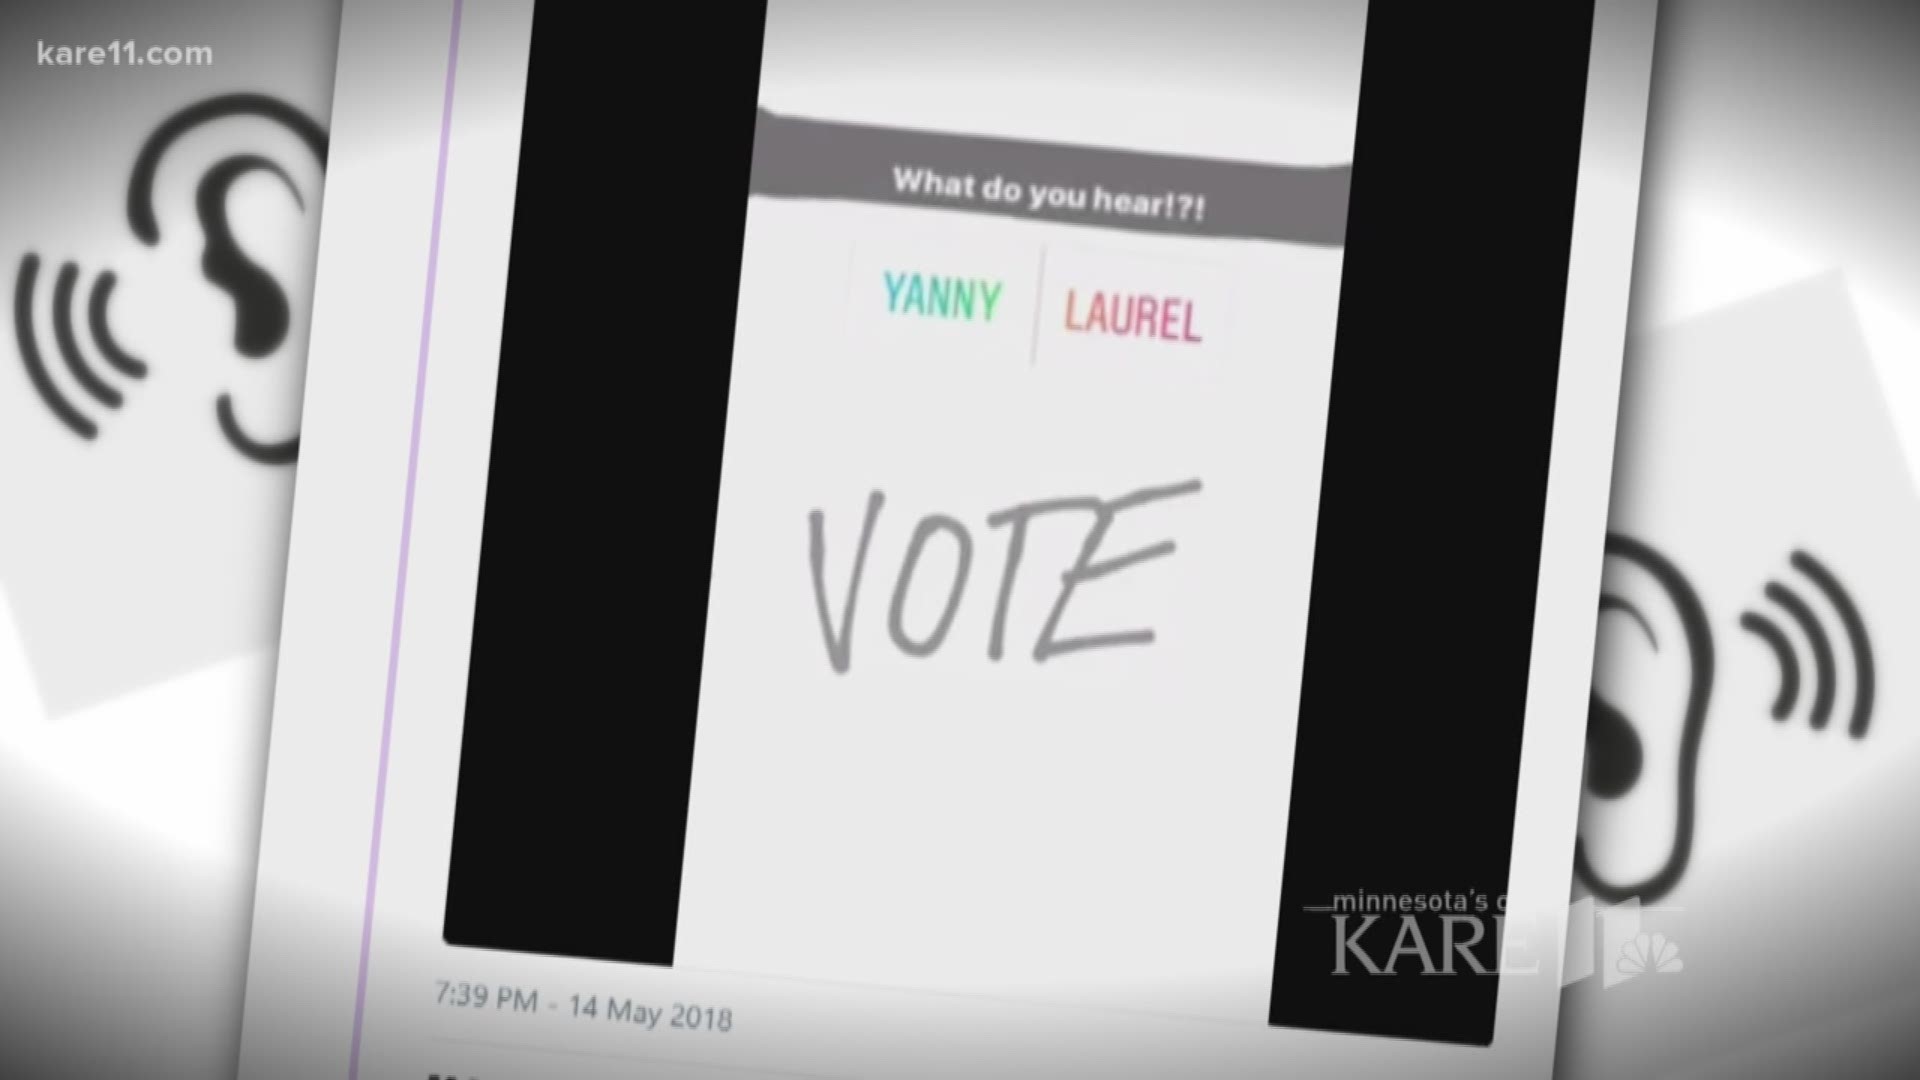 People worked up over 'Yanny' or 'Laurel'